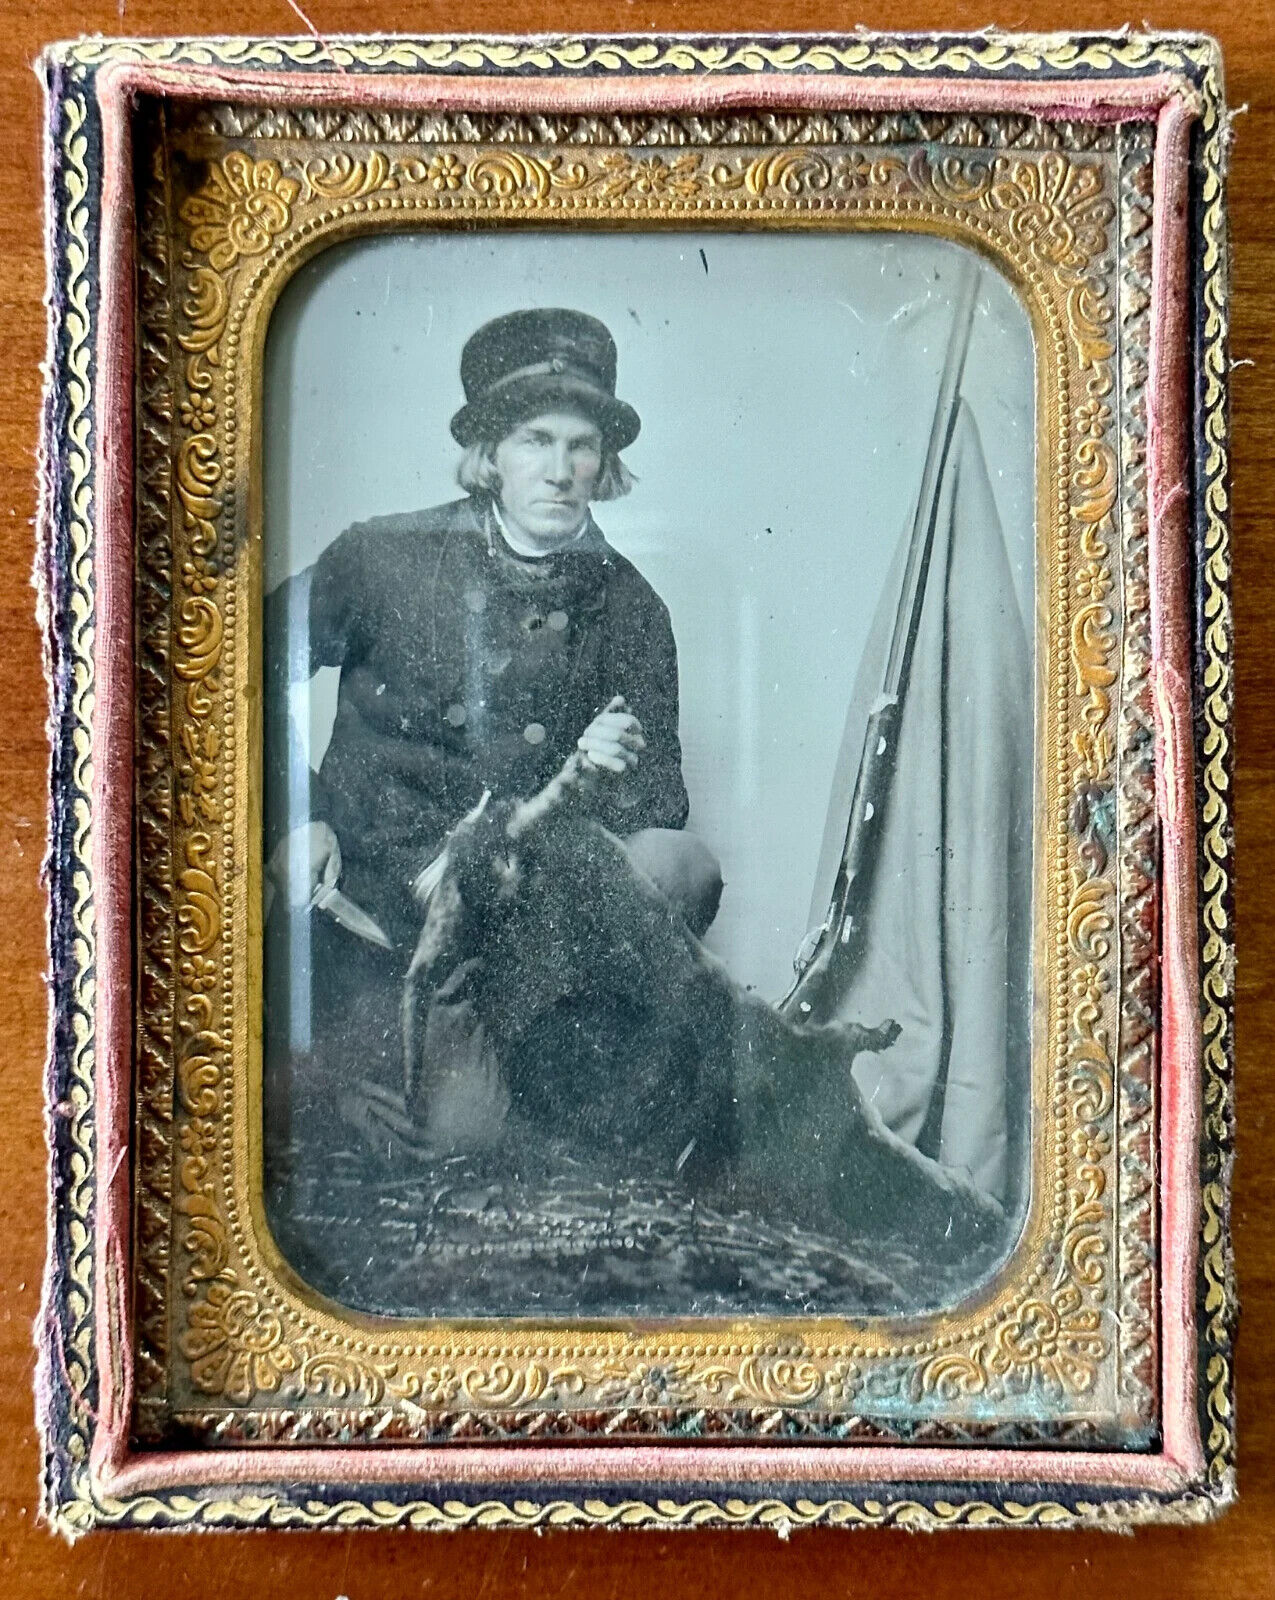 Excellent Rare 1850s Ambrotype Deer Hunter with Gun, Knife / Hunting Photo 1800s